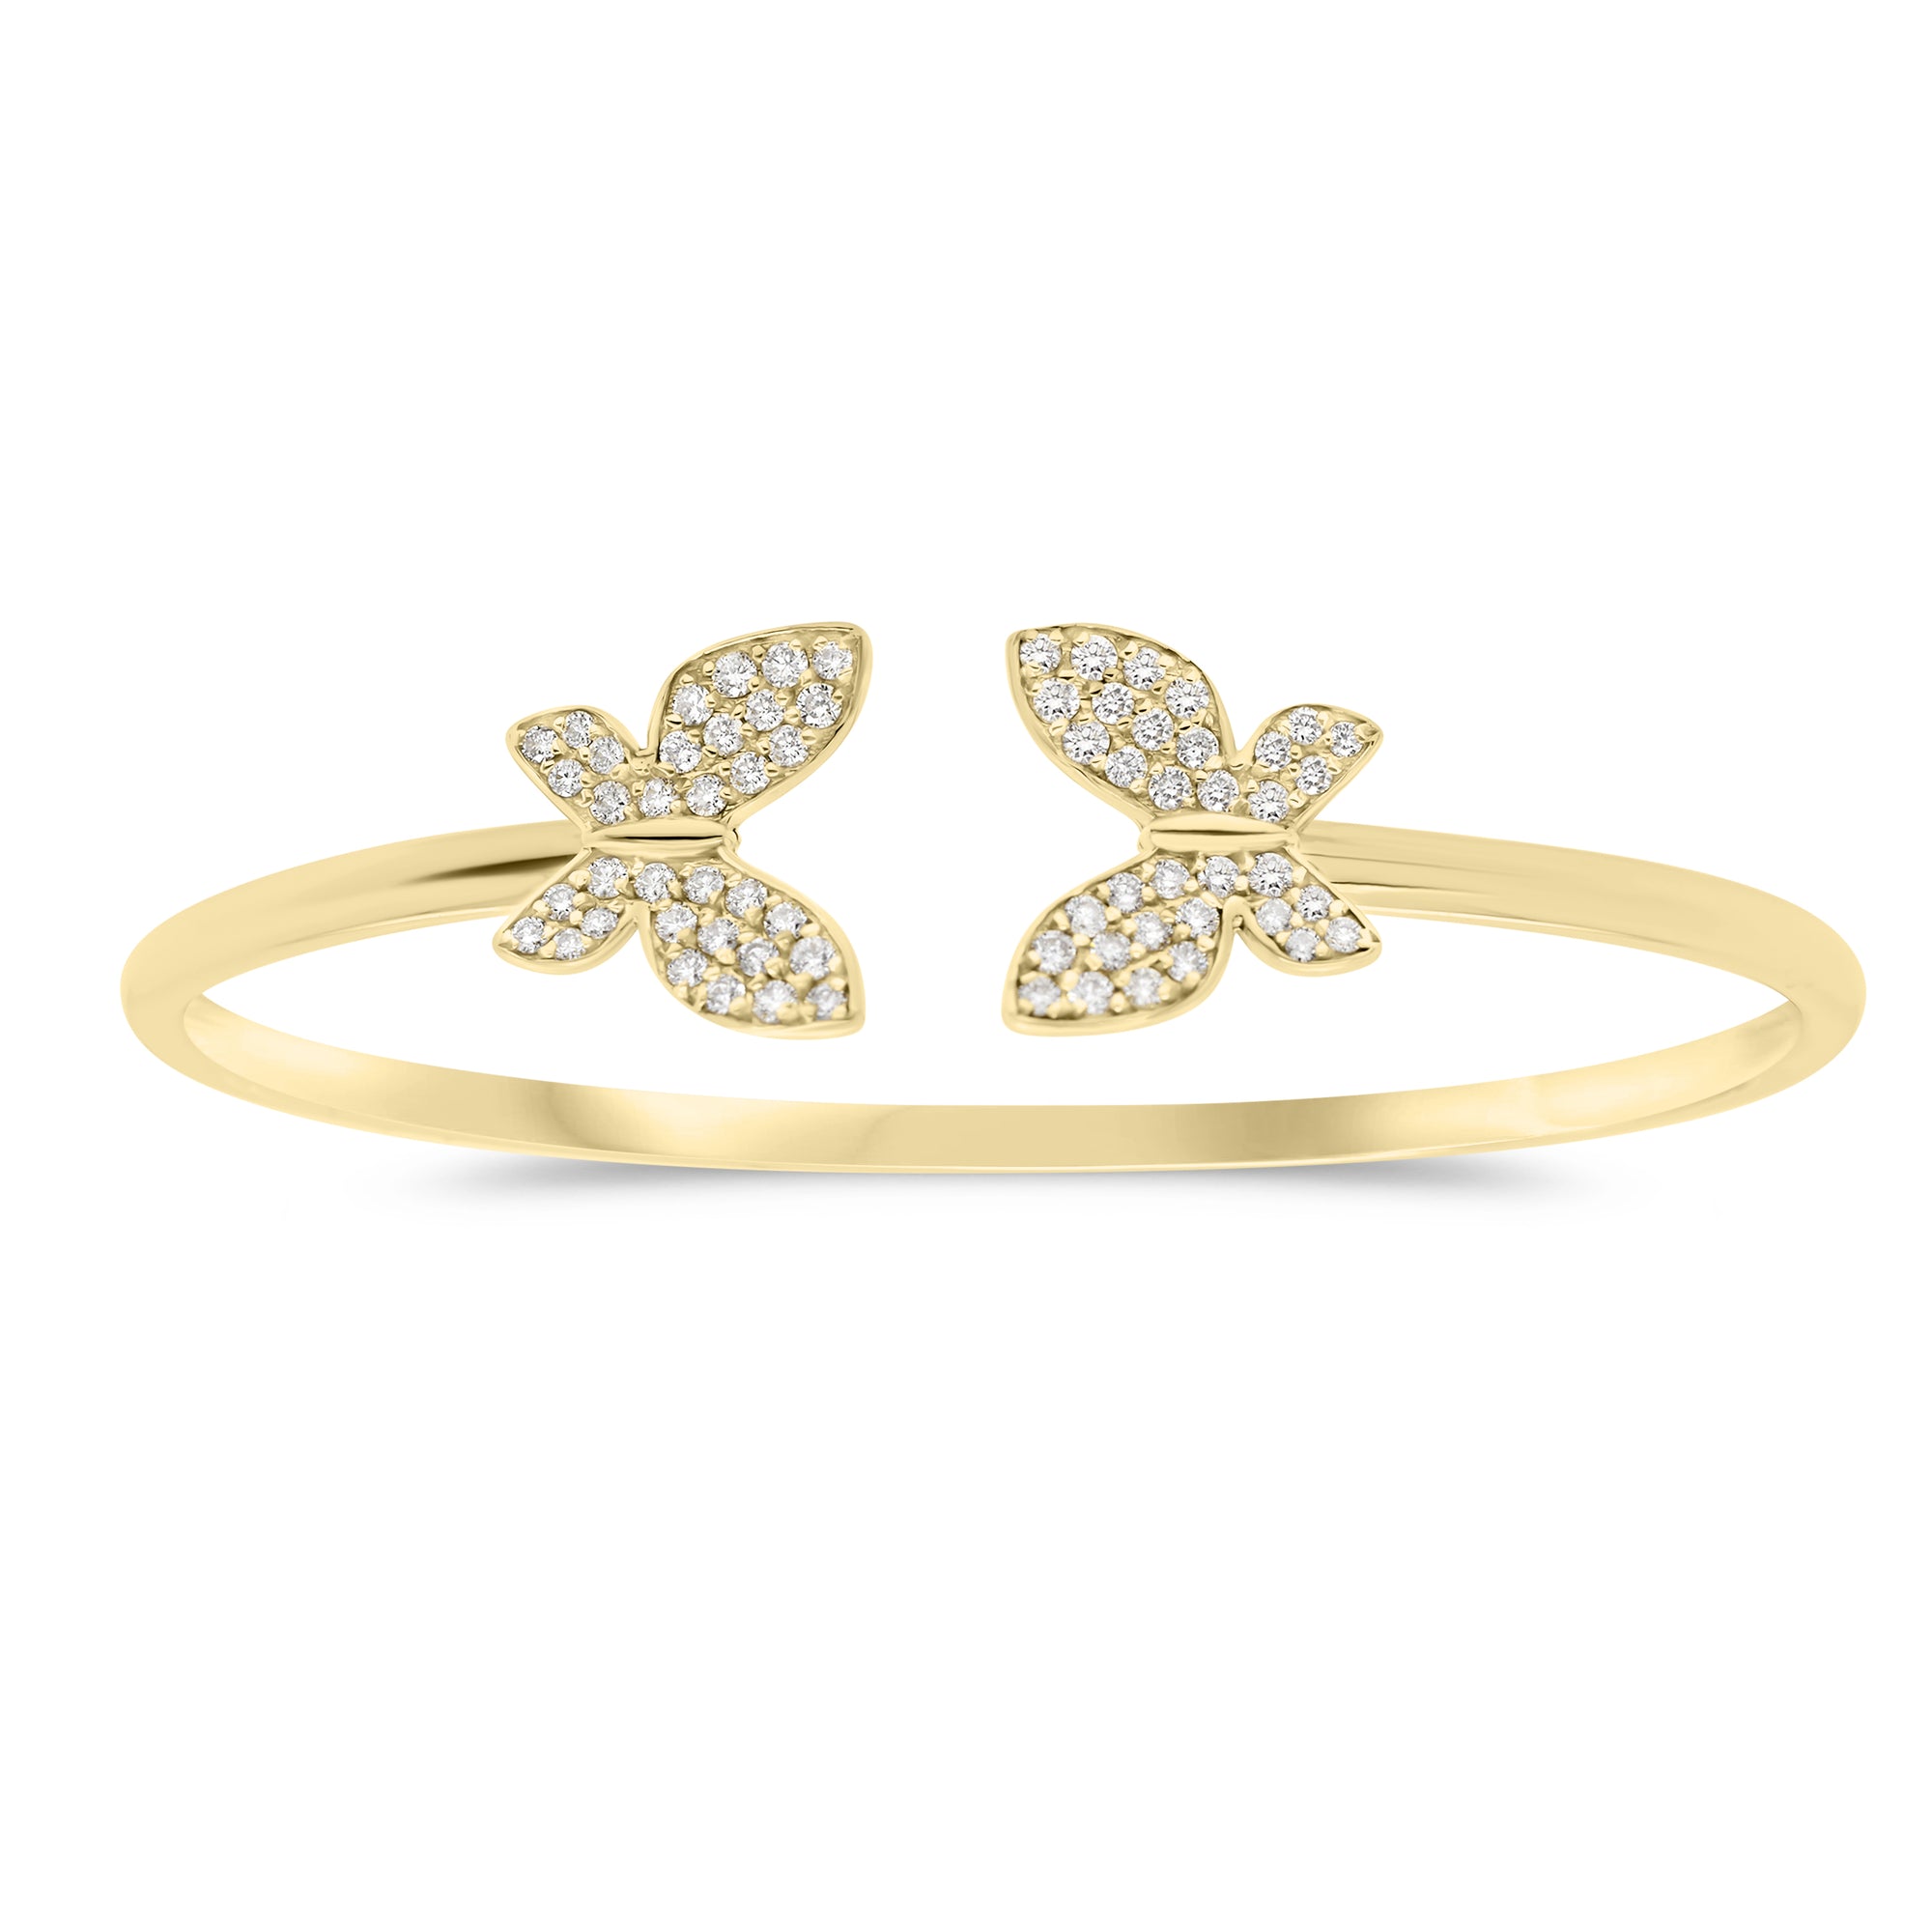 Butterfly Pave Set Diamond Cuff - 14K gold weighing 7.29 grams  - 68 round, pave diamonds weighing 0.62 carats